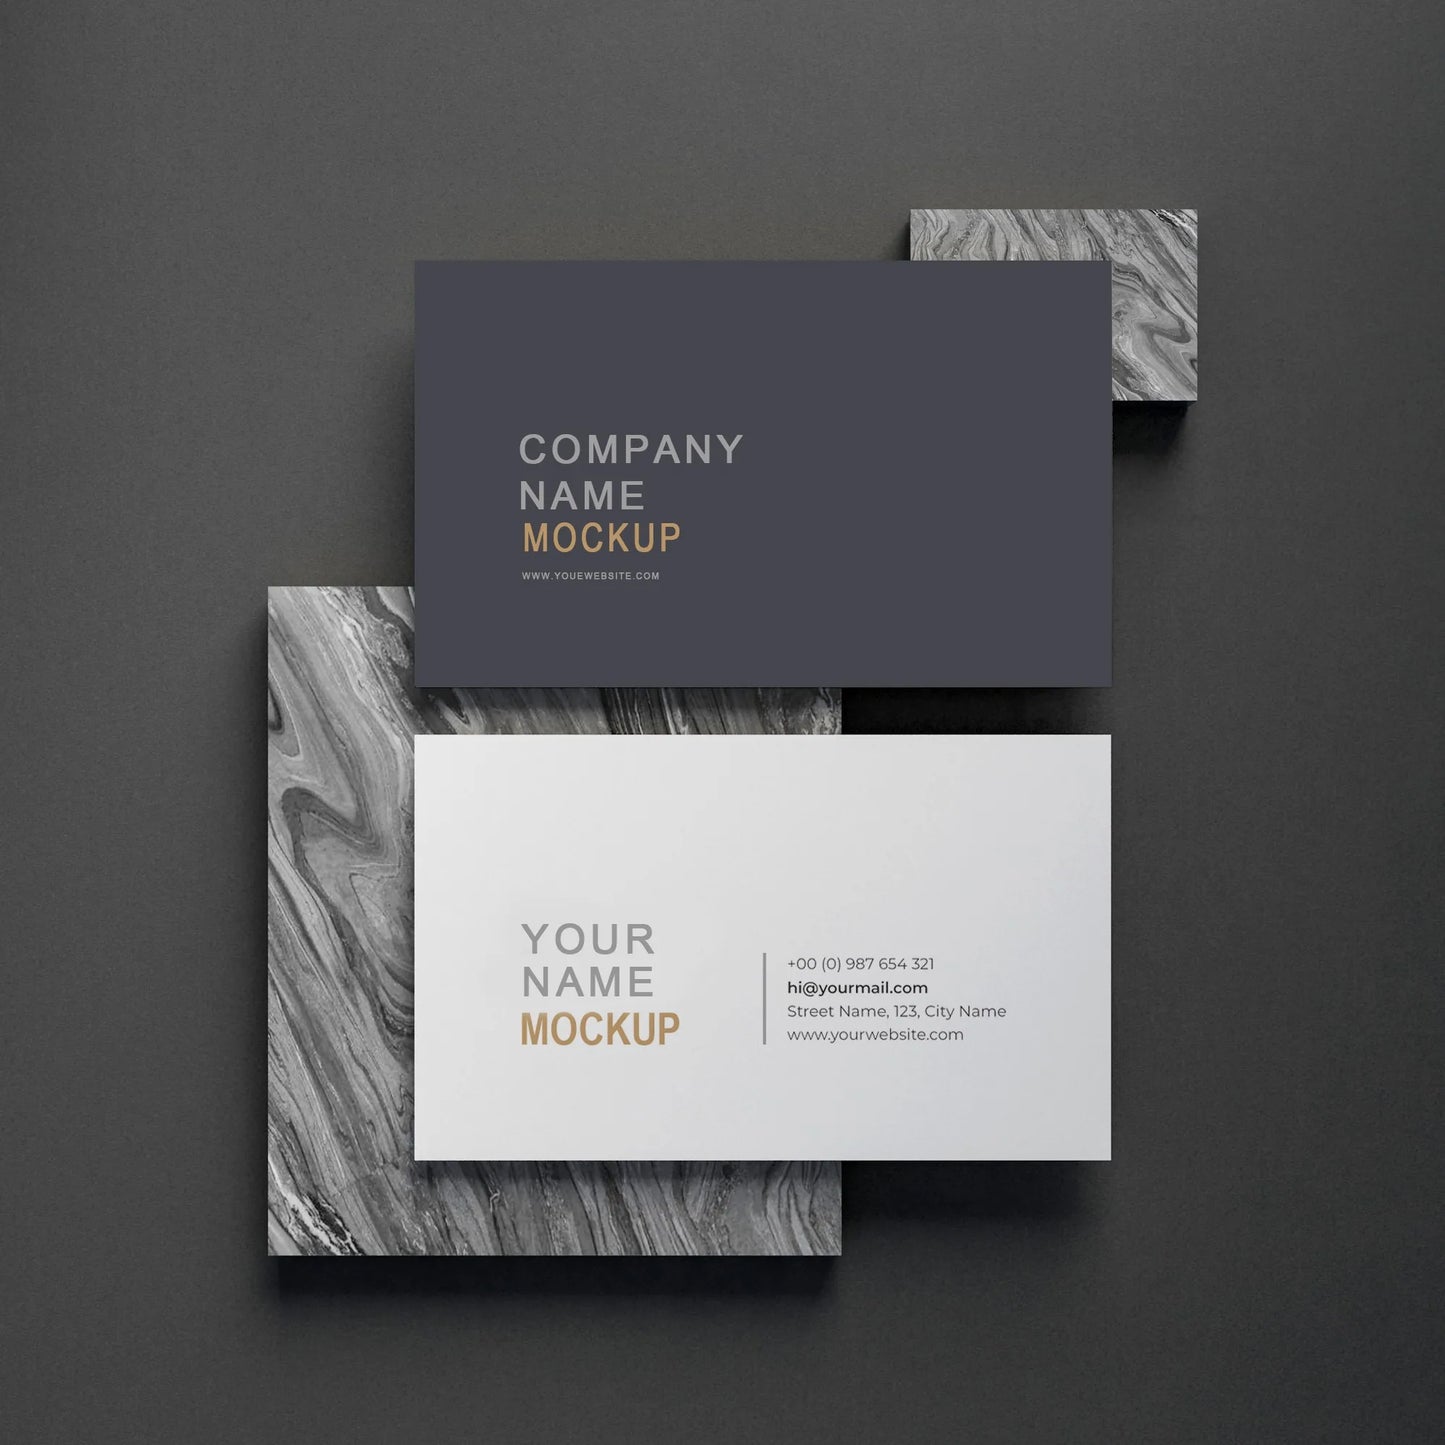 Custom Business Cards and more